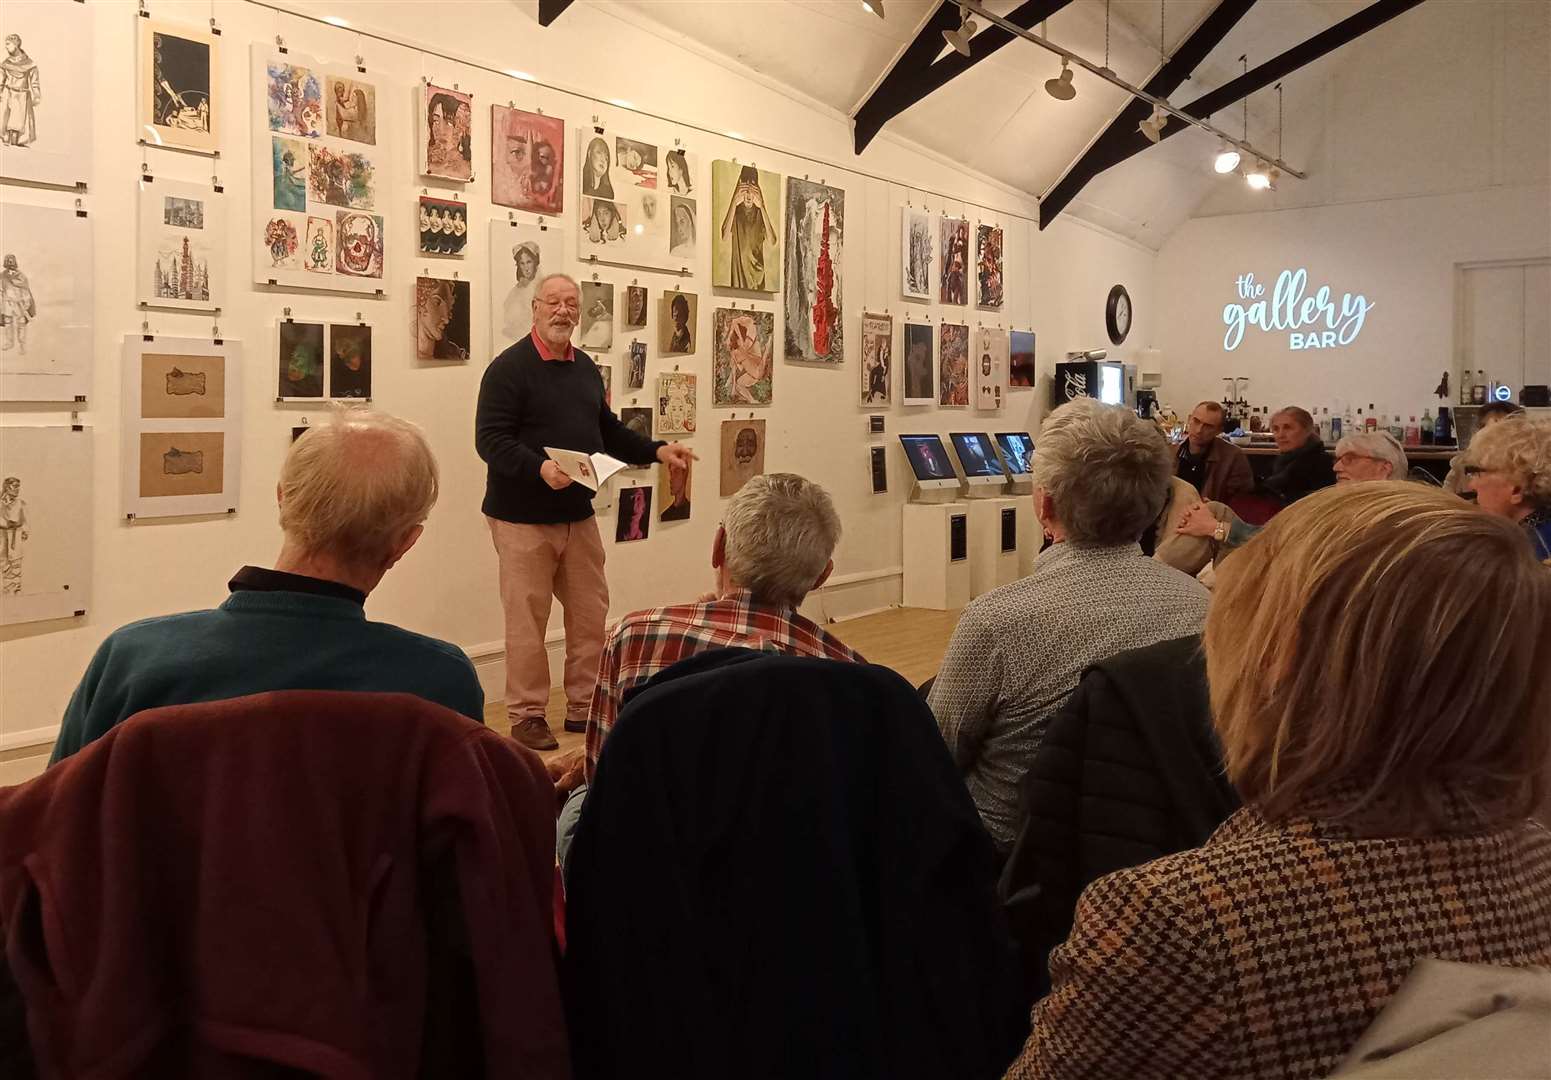 Bill Taylor recites one of his poems at the Pint of Poetry event in Stamford Arts Centre's Gallery Bar